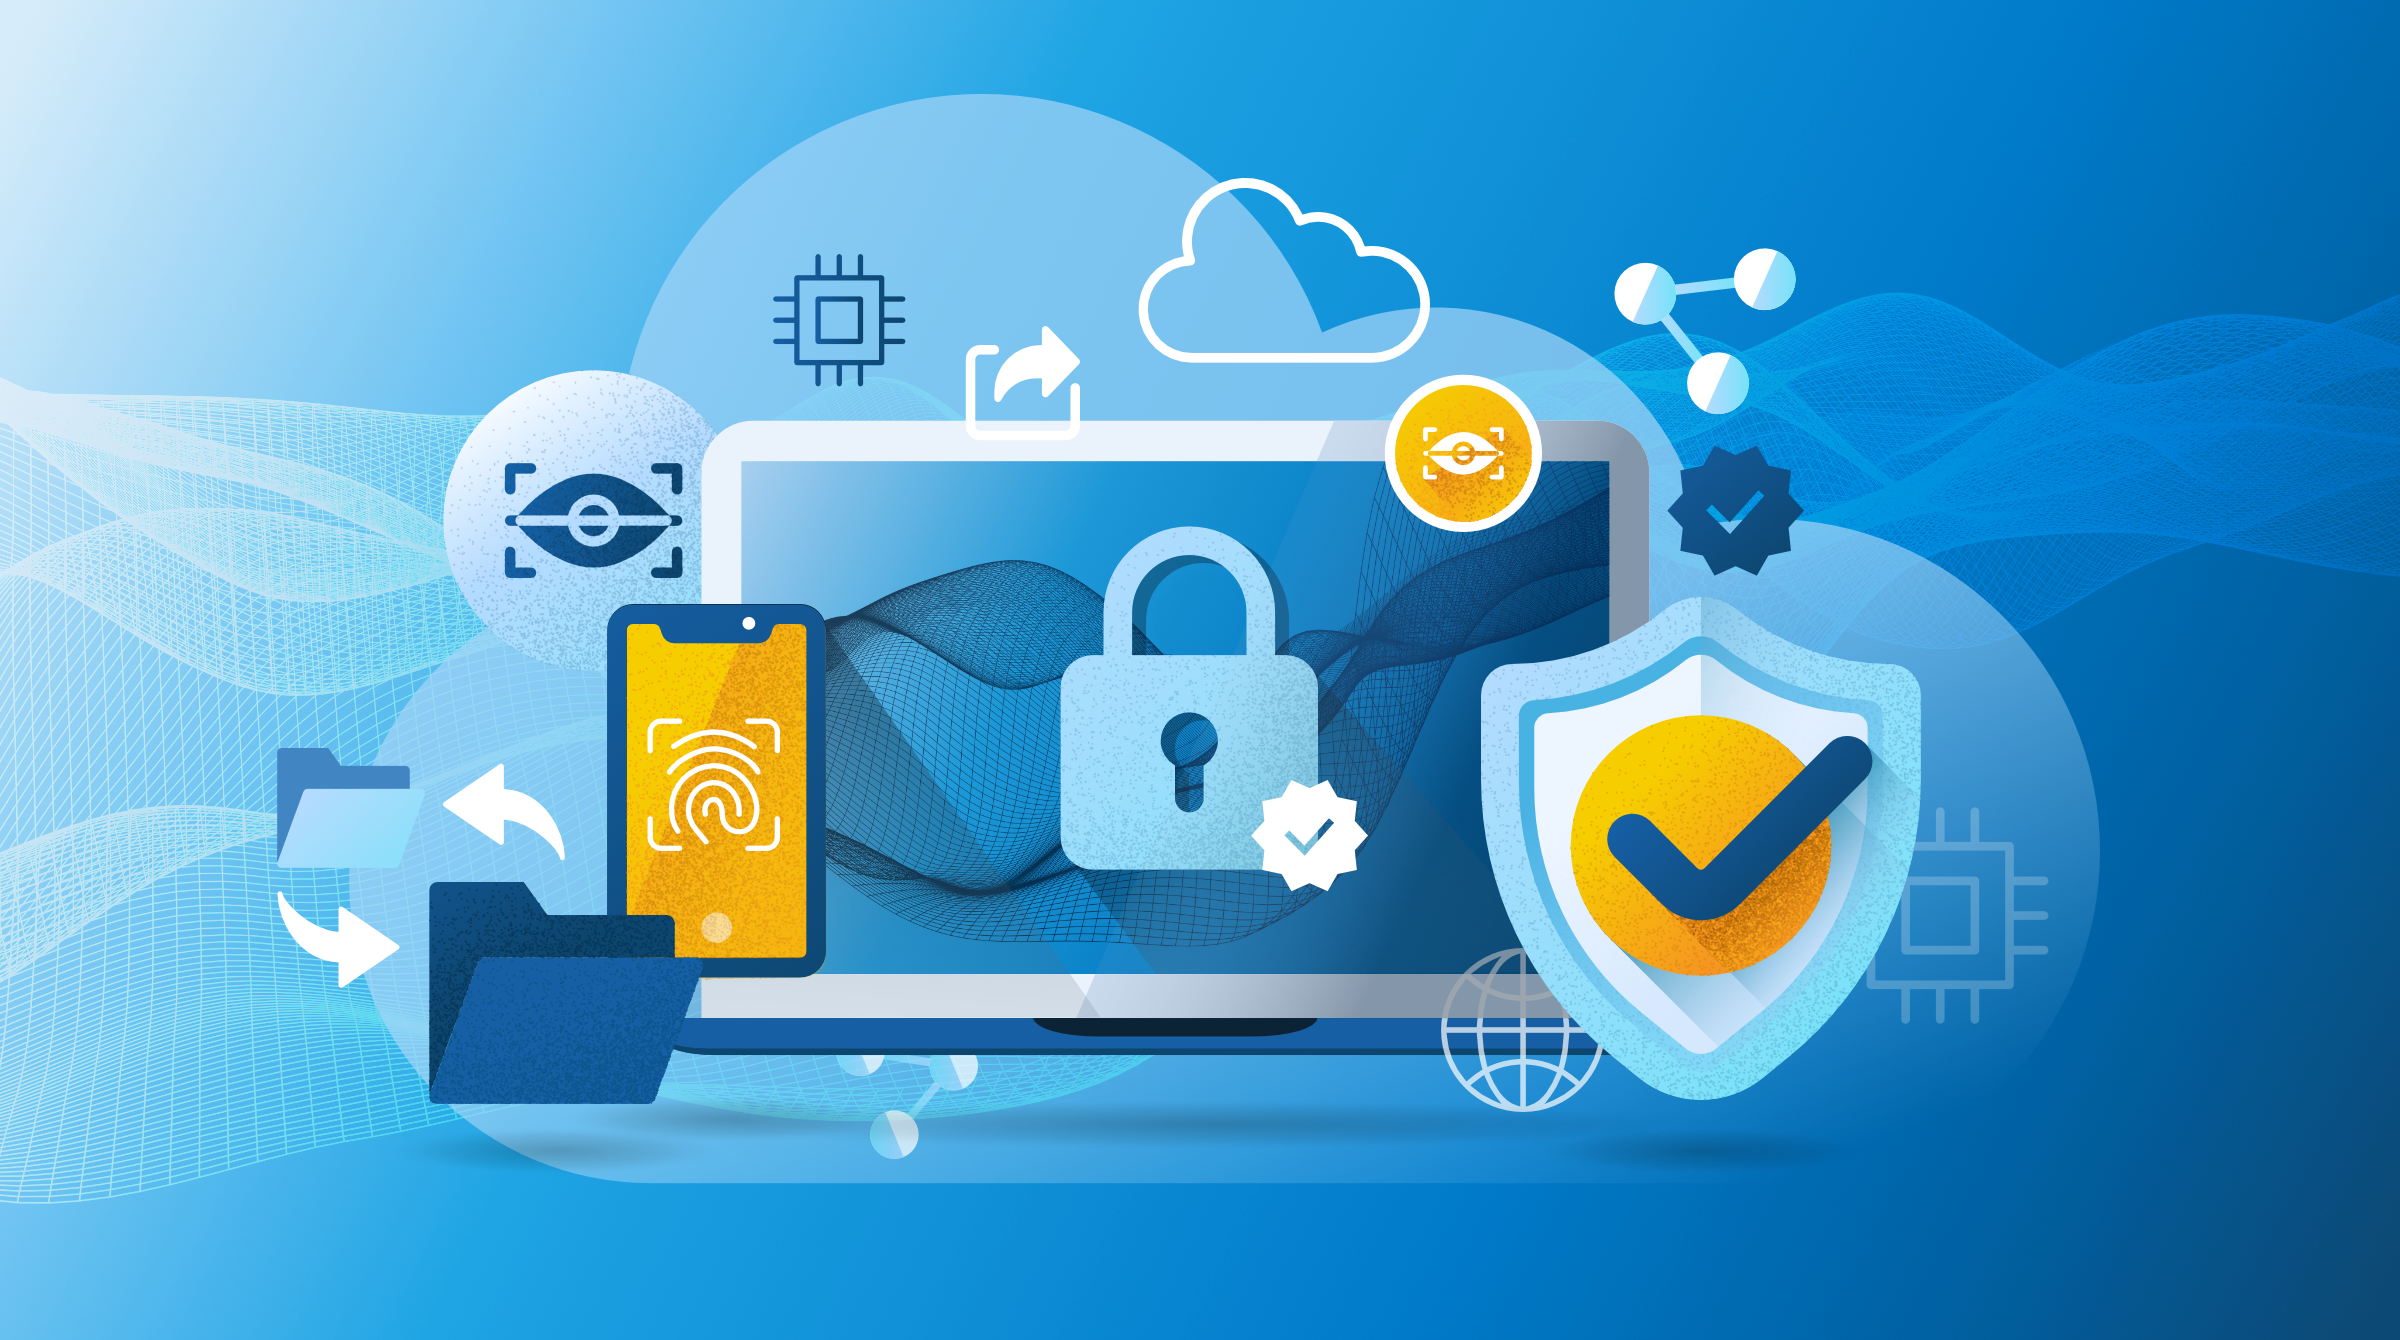 Top 10 security checklist recommendations for cloud customers